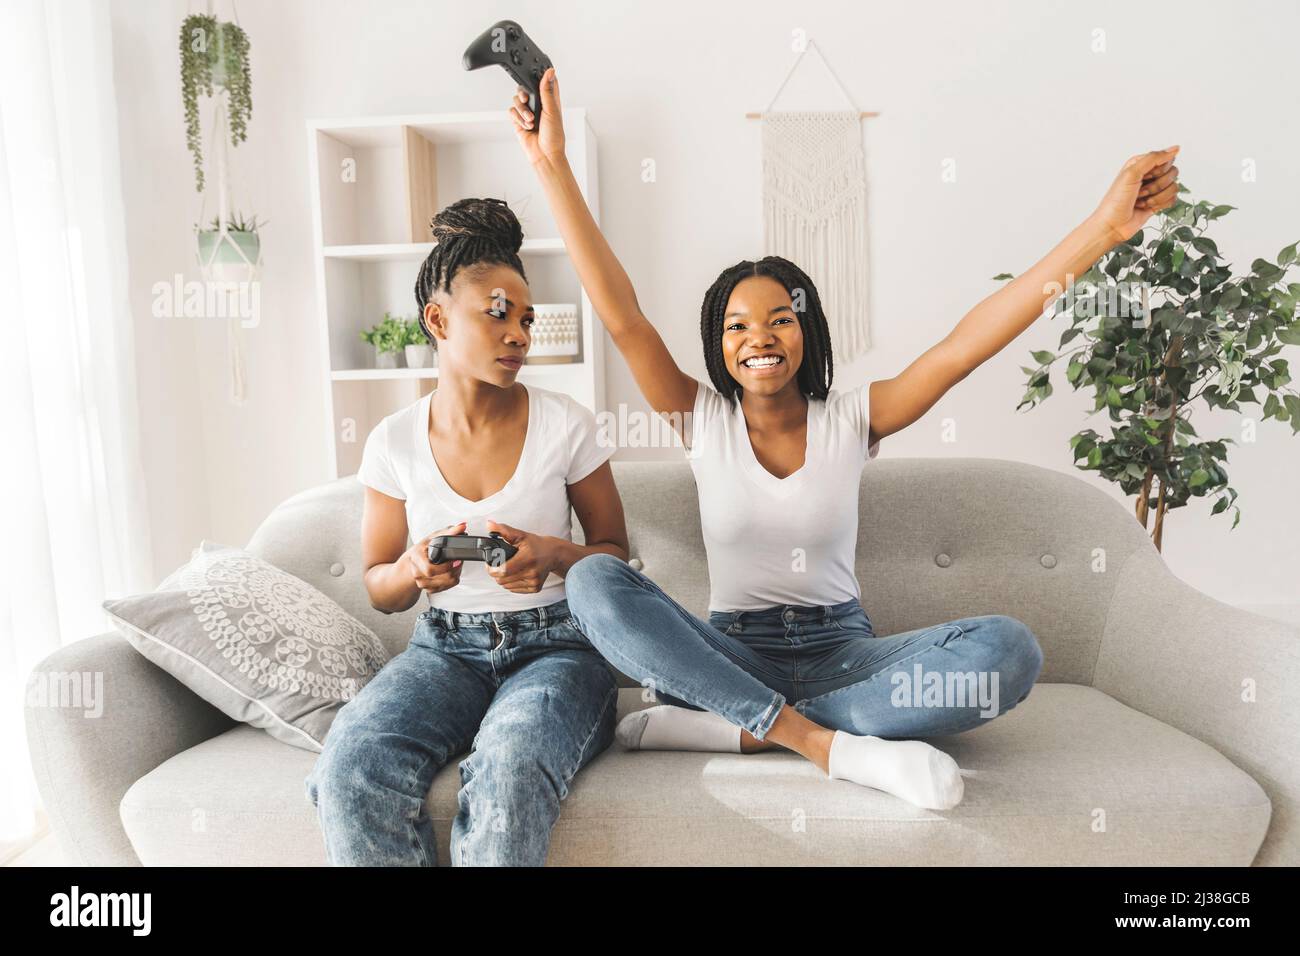 Mother and daughter sitting on sofa at home play video game together Stock Photo